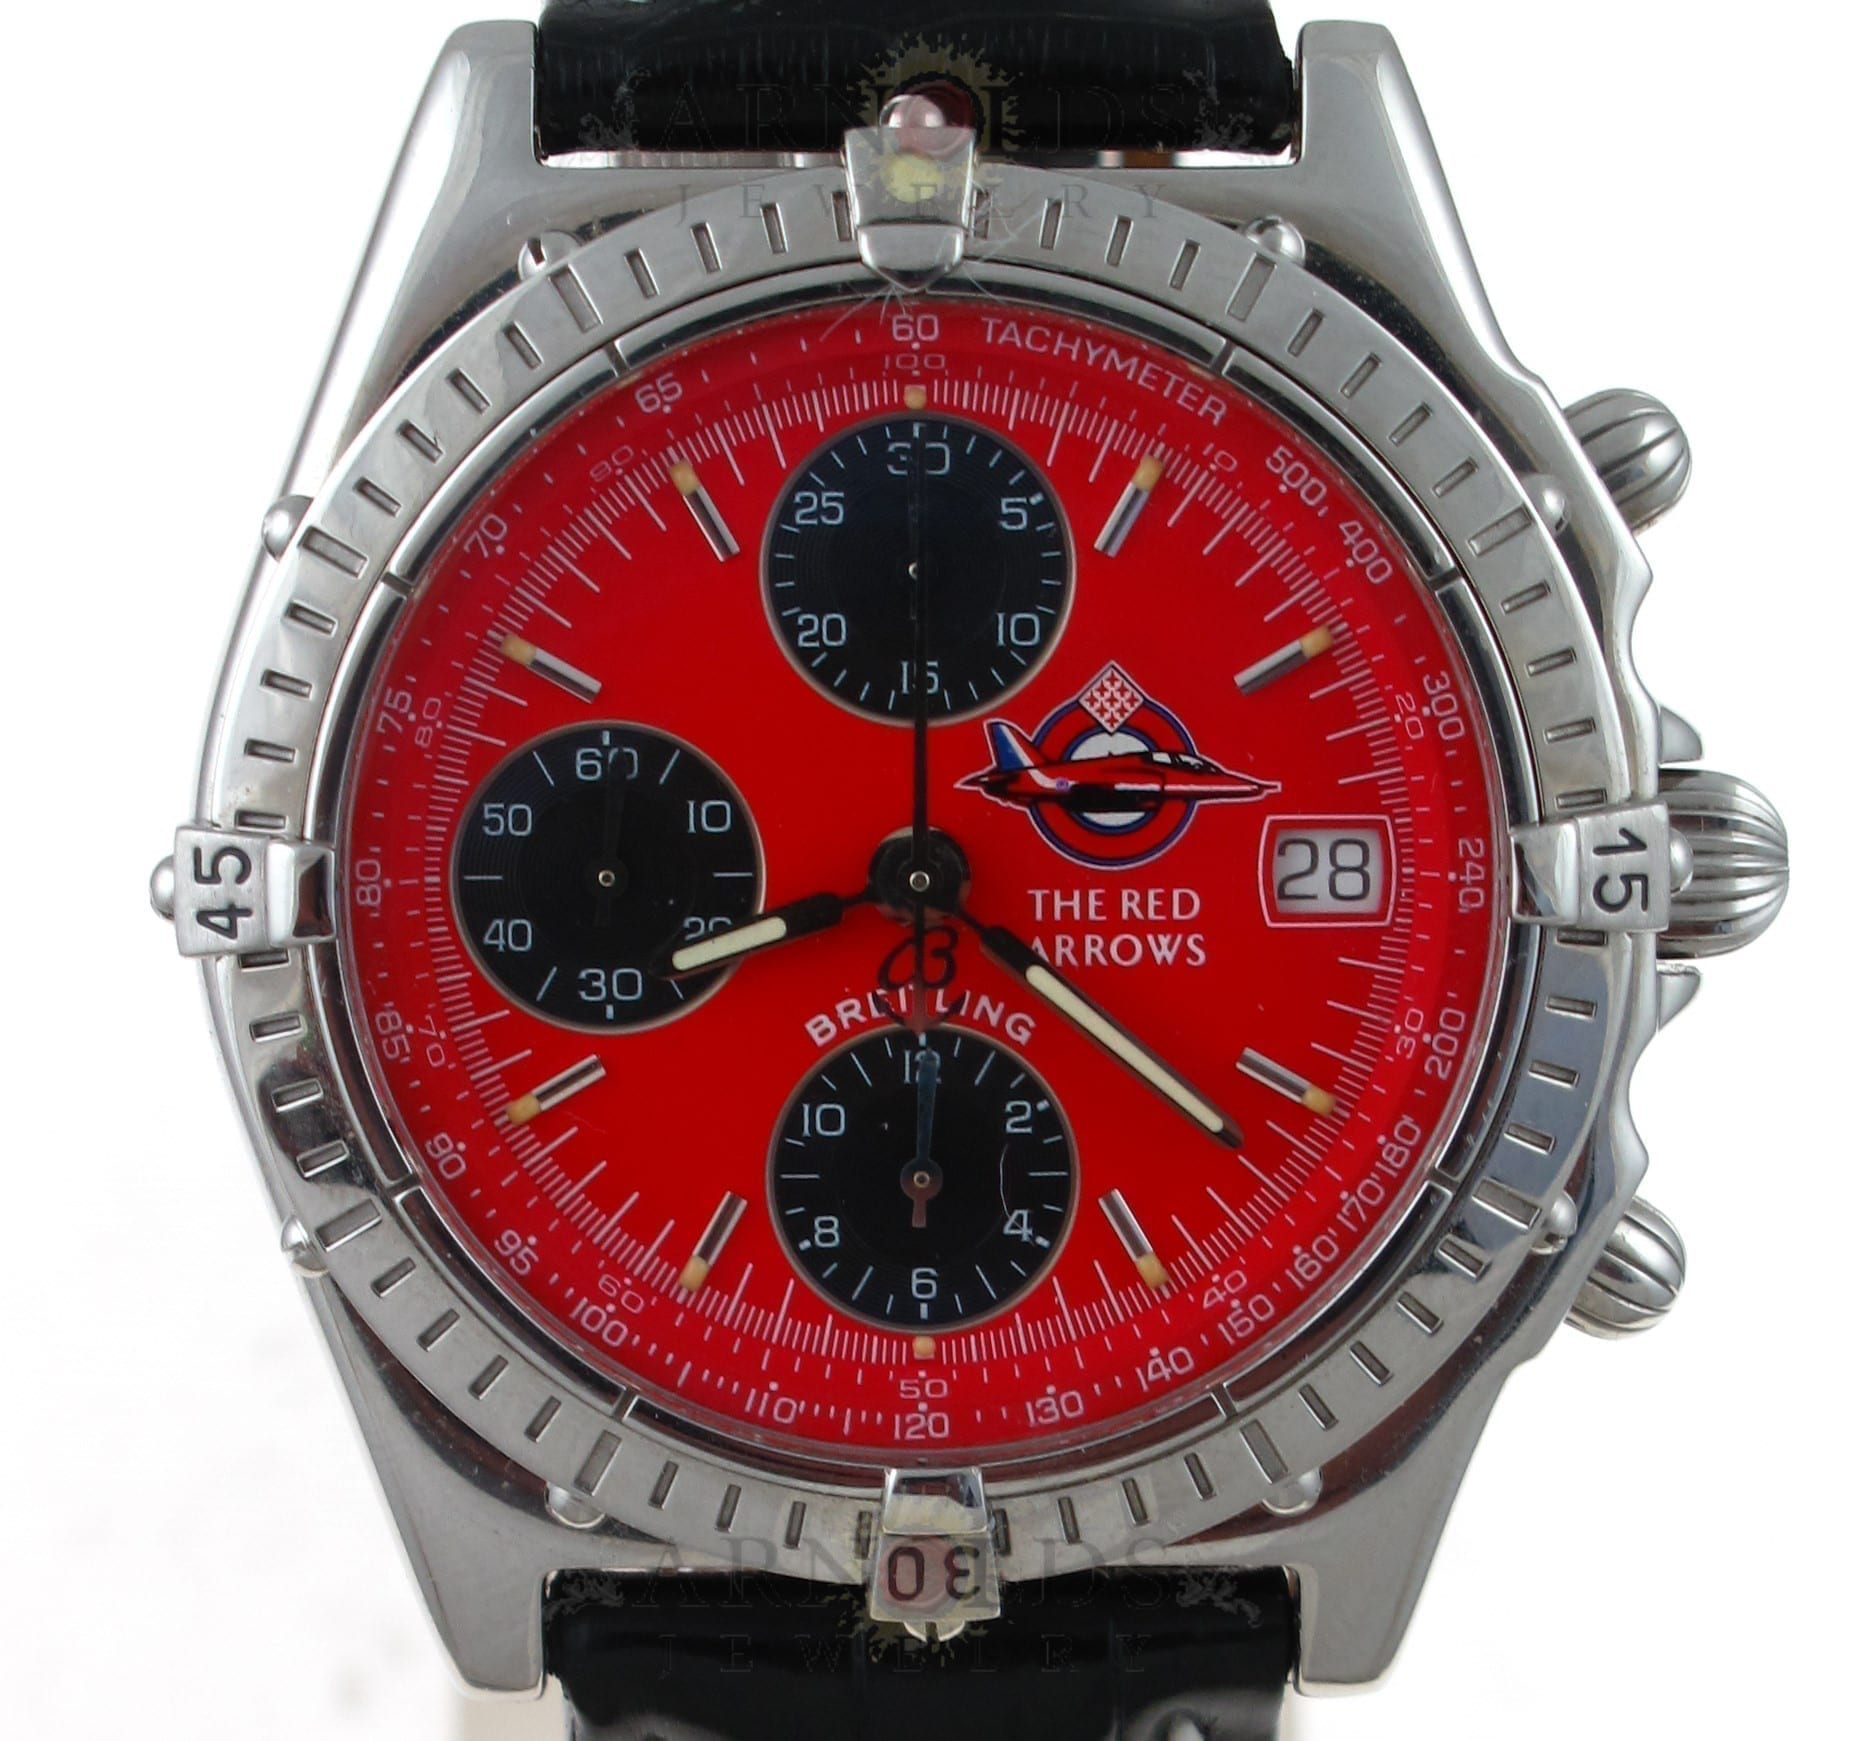 Pre-Owned 1996 Gents 39mm Limited Edition Breitling Red Arrows Chronograph